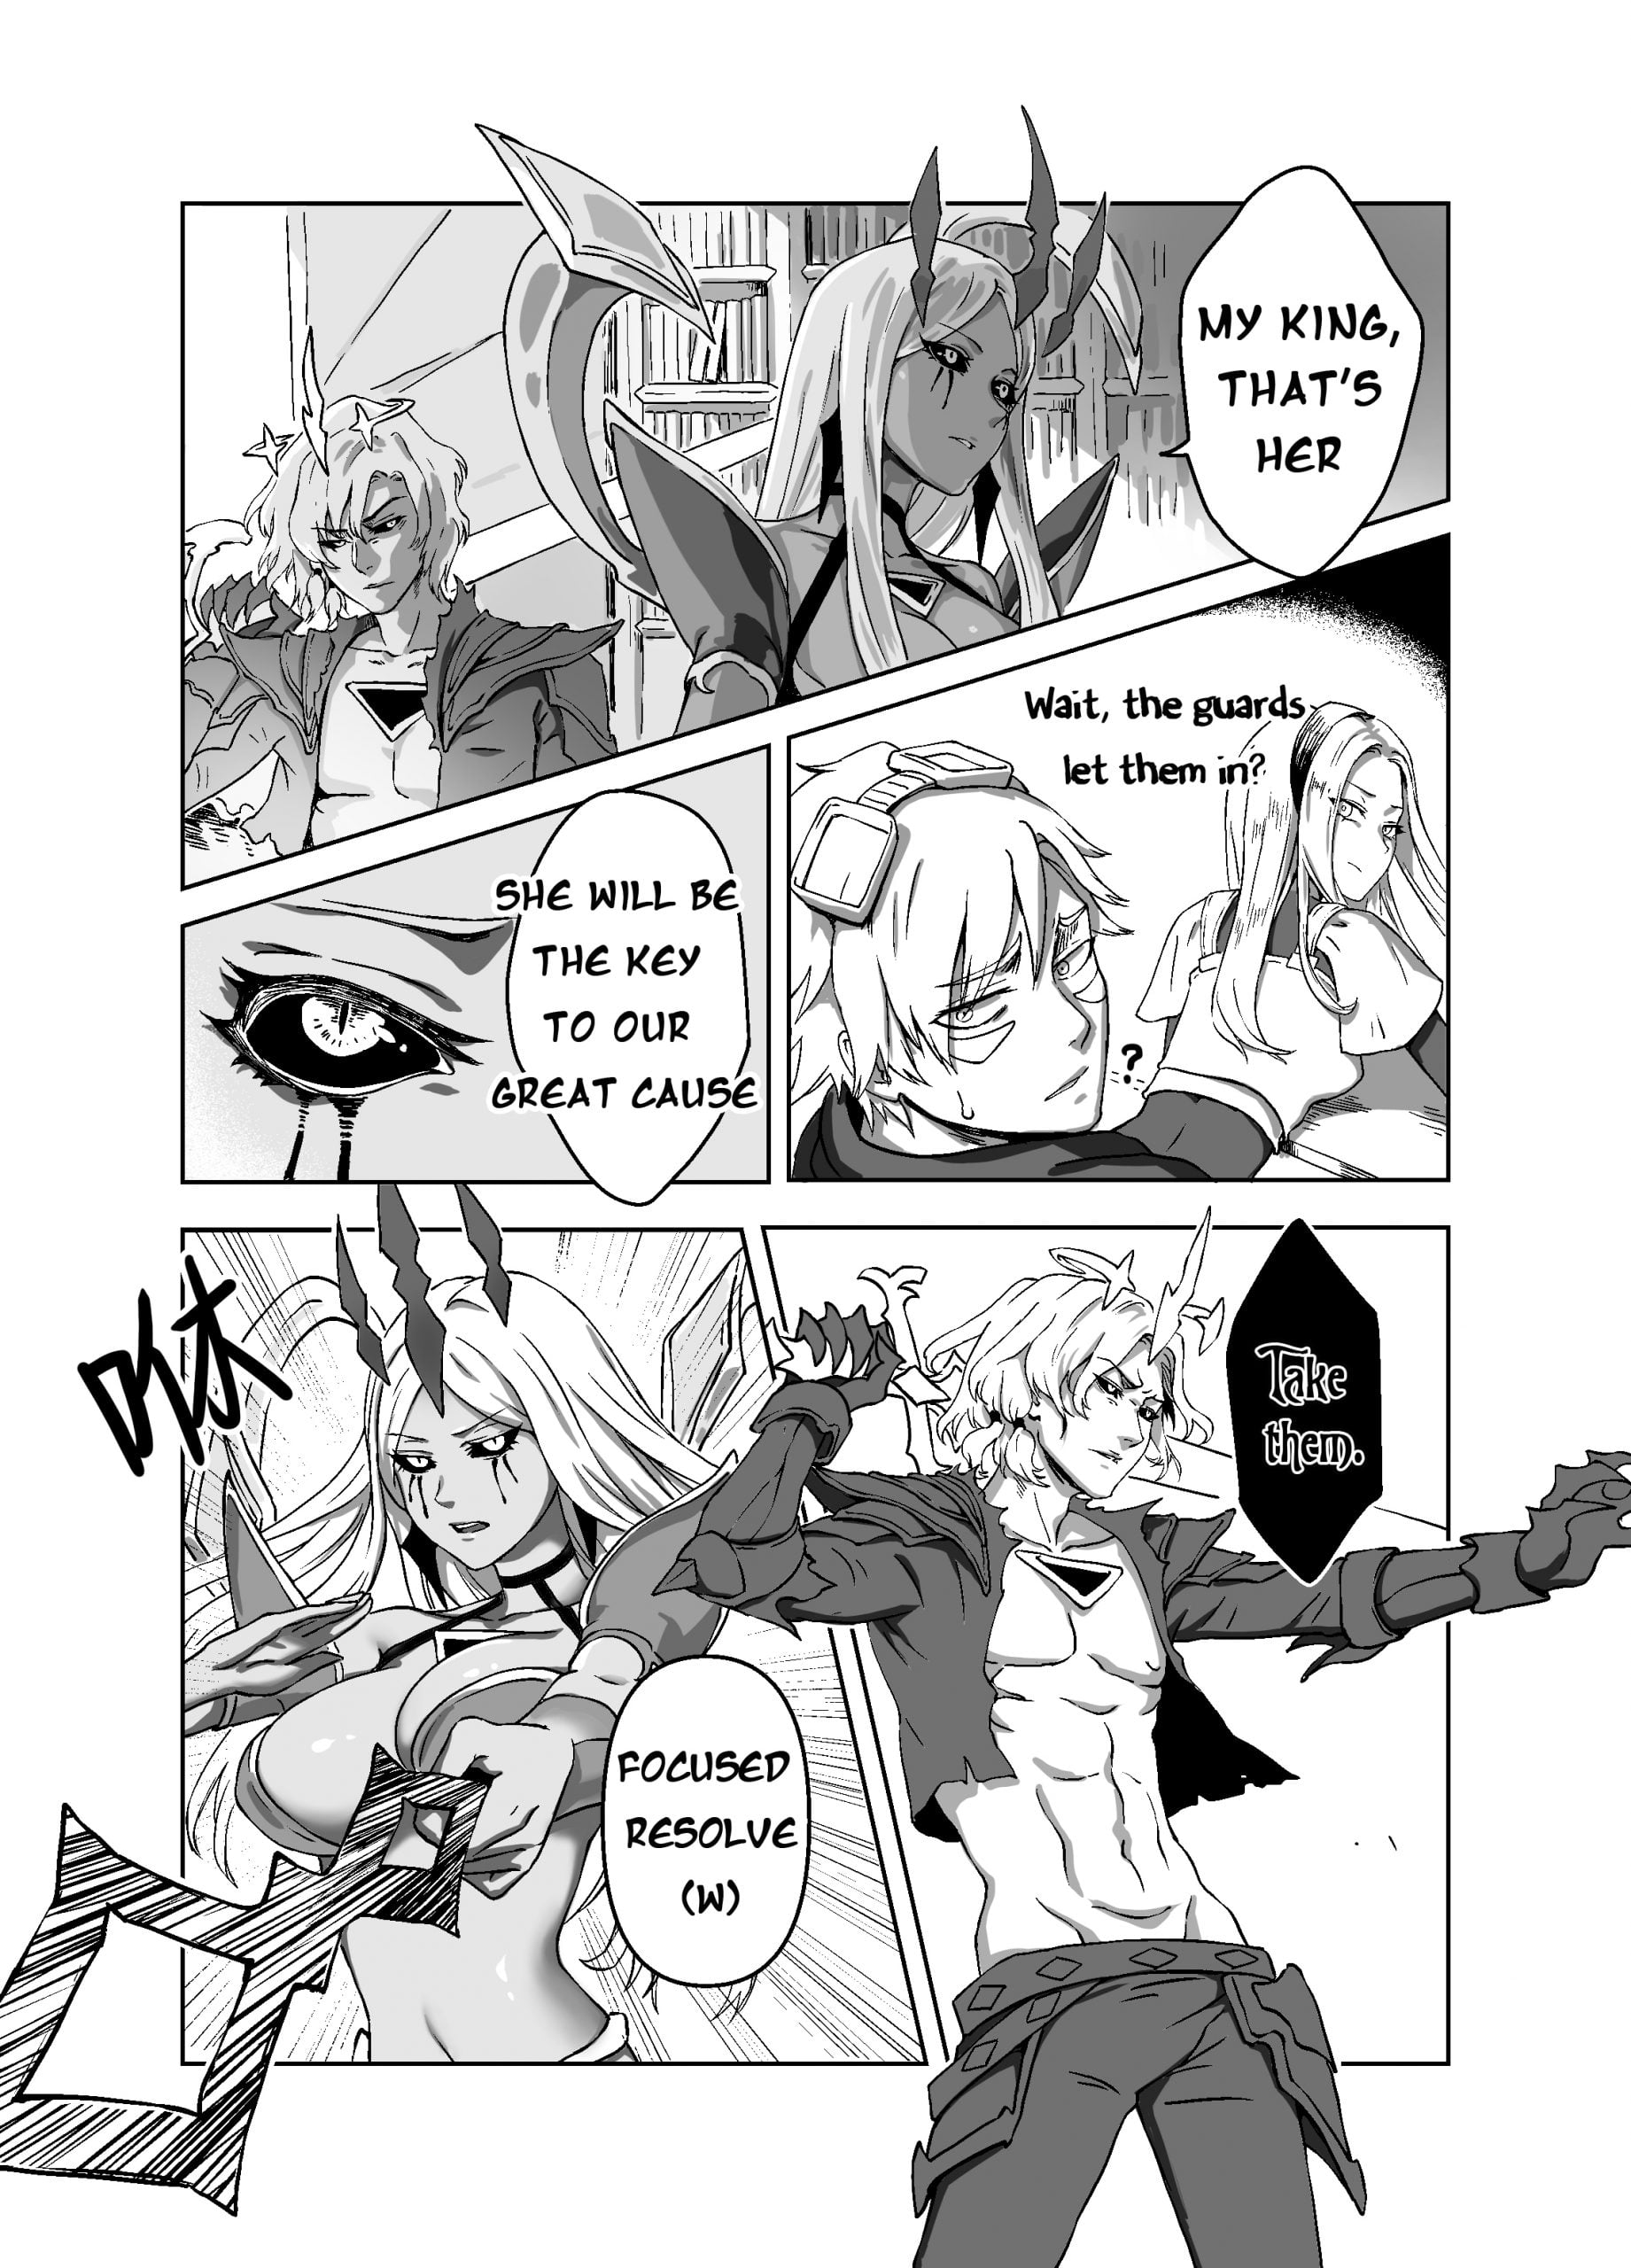 [ENG - DOUJIN] Dith ~ Lux x Viego ft. Ezreal Hentai